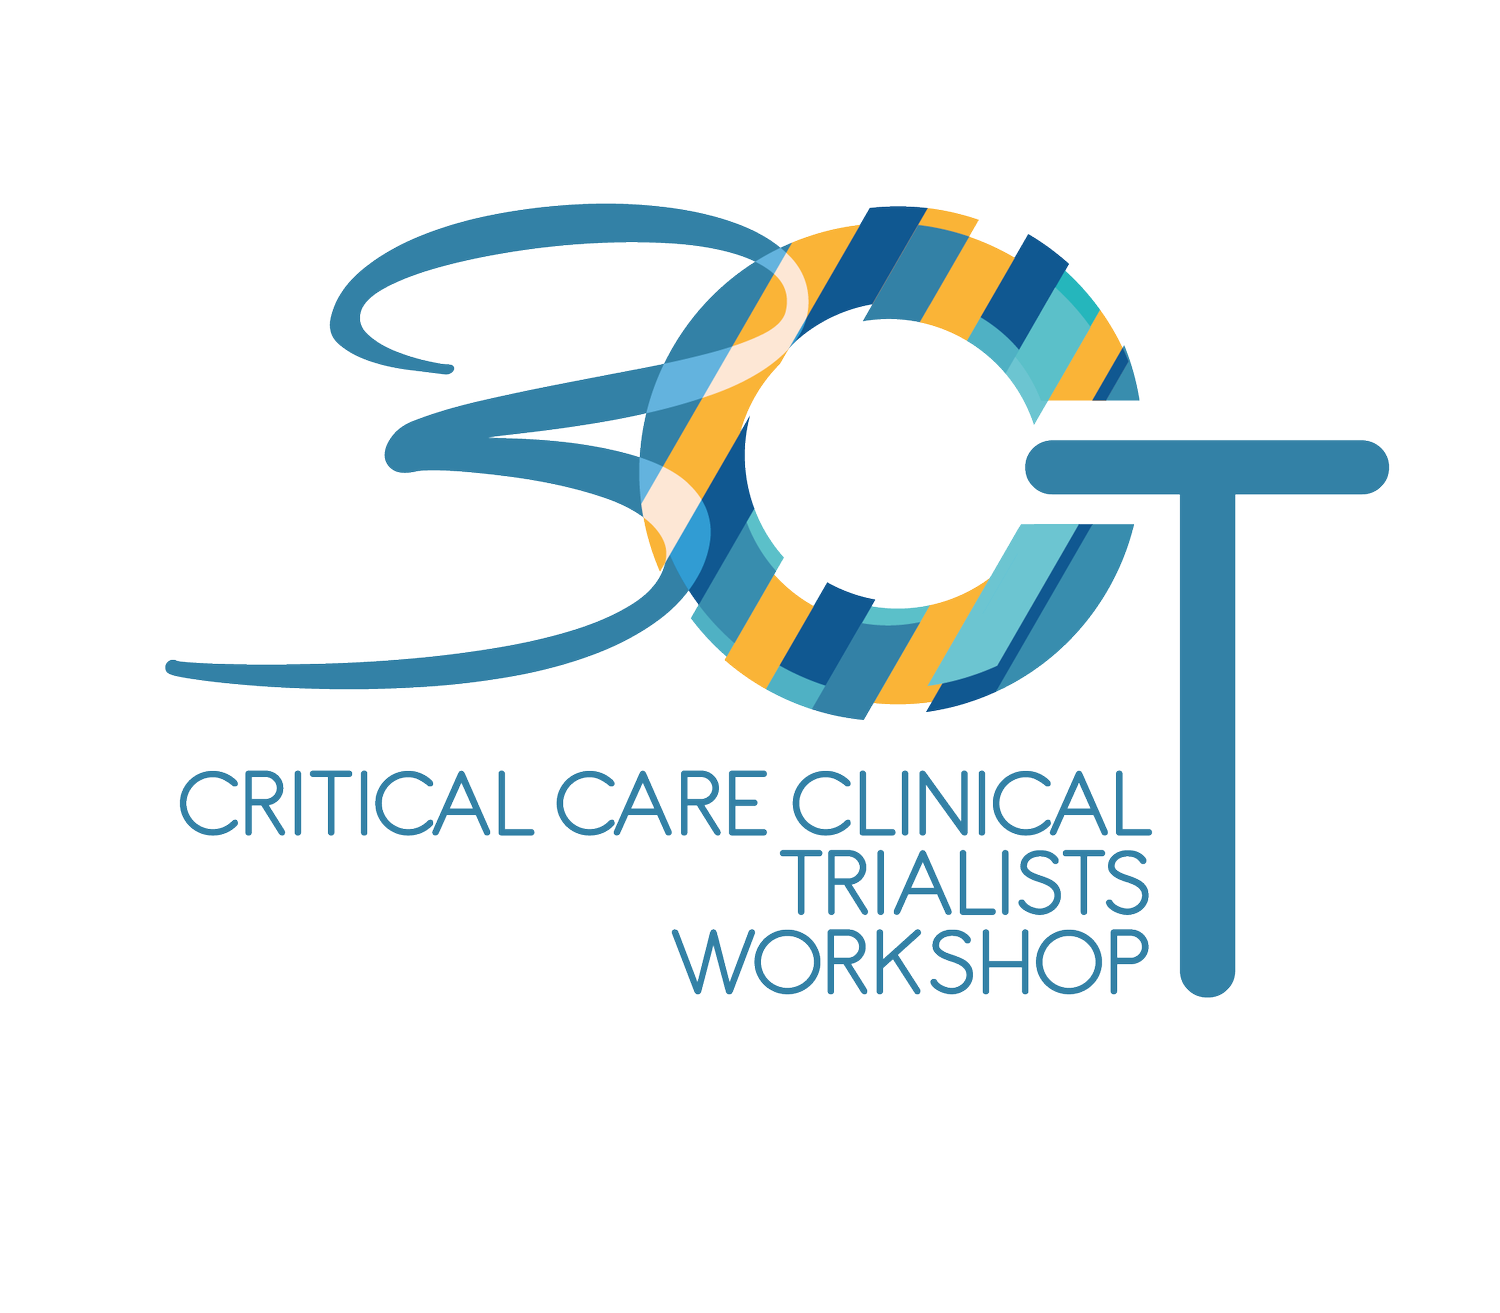 Critical Care Clinical Trialists Workshop